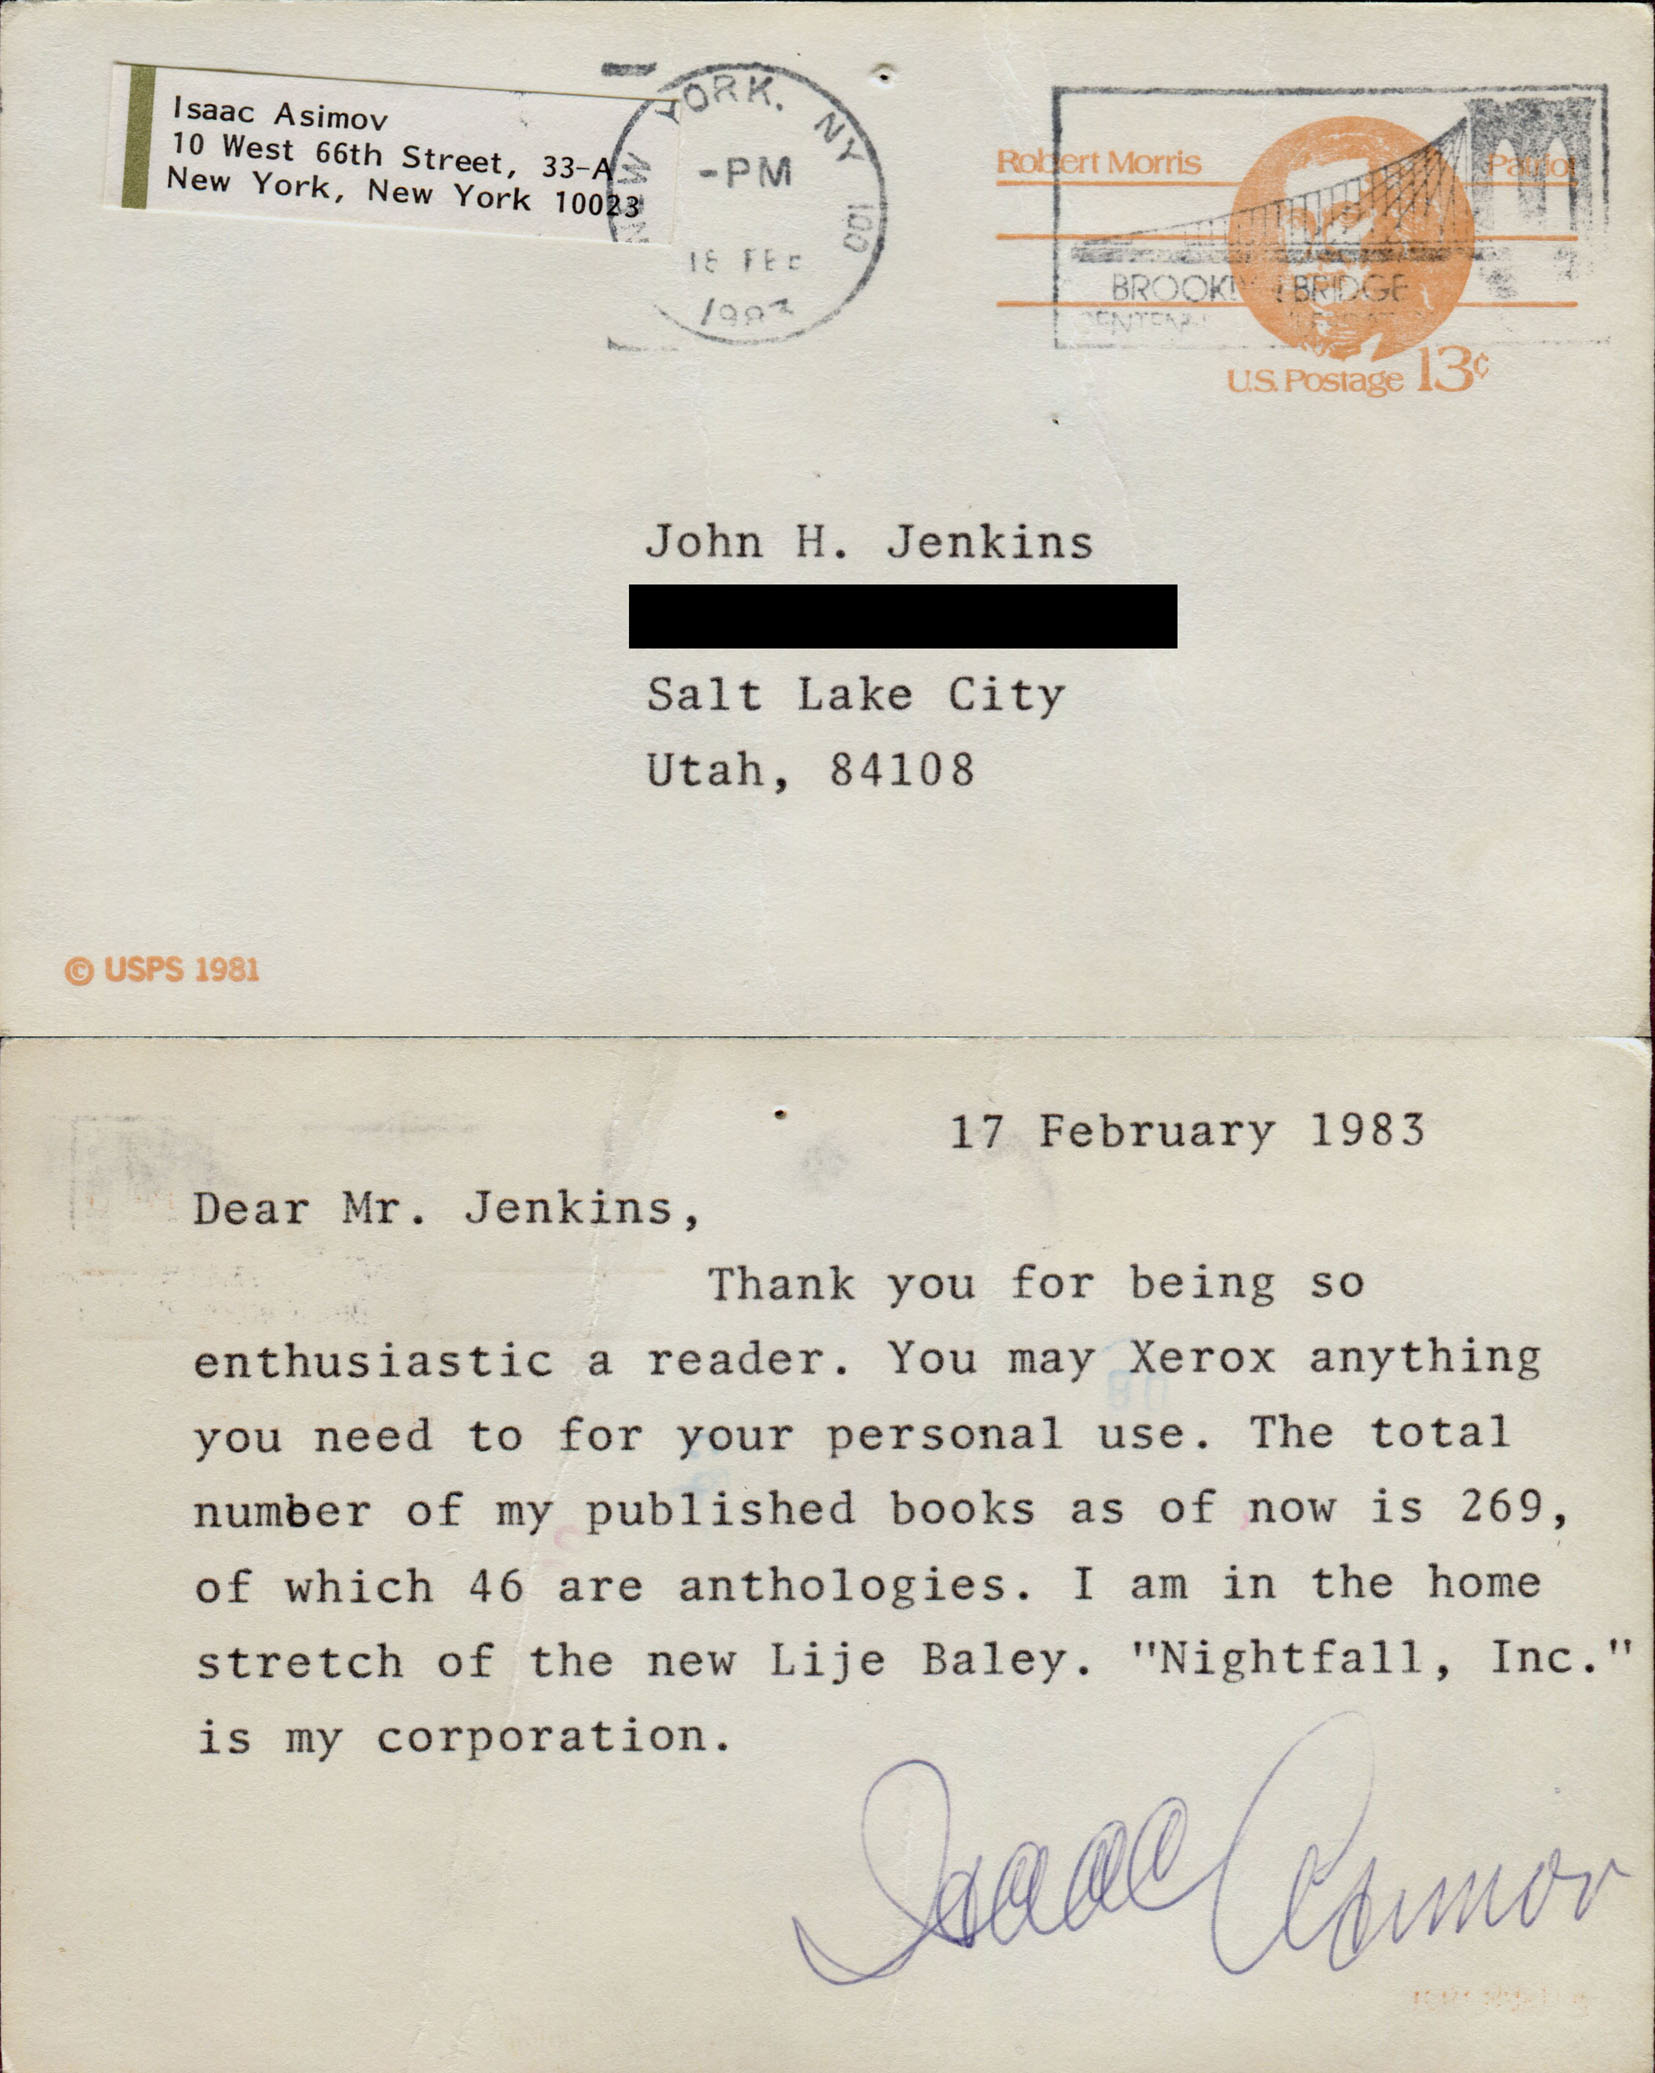 17 February 1983. Dear Mr. Jenkins, Thank you for being so enthusiastic a reader. You may Xerox anything you need to for your personal use. The total number of my published books as of now is 269, of which 46 are anthologies. I am in the home stretch of the new Lije Baley. 'Nightfall, Inc.' is my corporation. Isaac Asimov